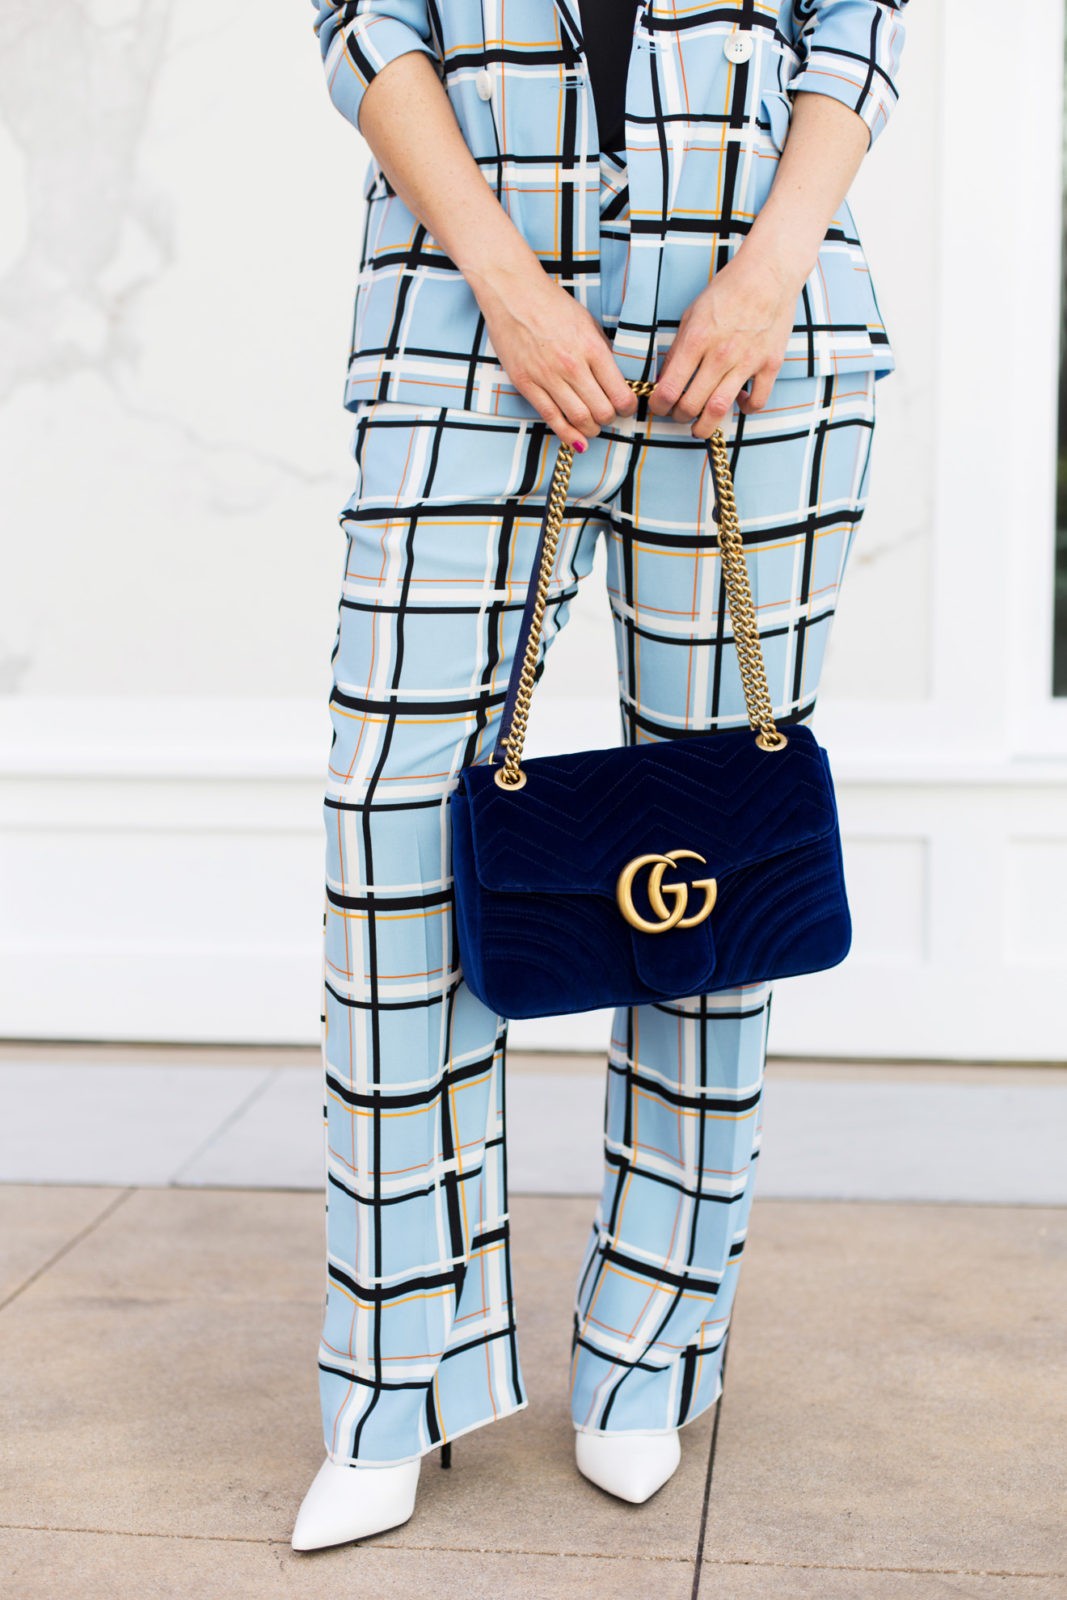 Toopshop plaid suits perfect for work, styled by top Los Angeles fashion blogger, Laura Lily